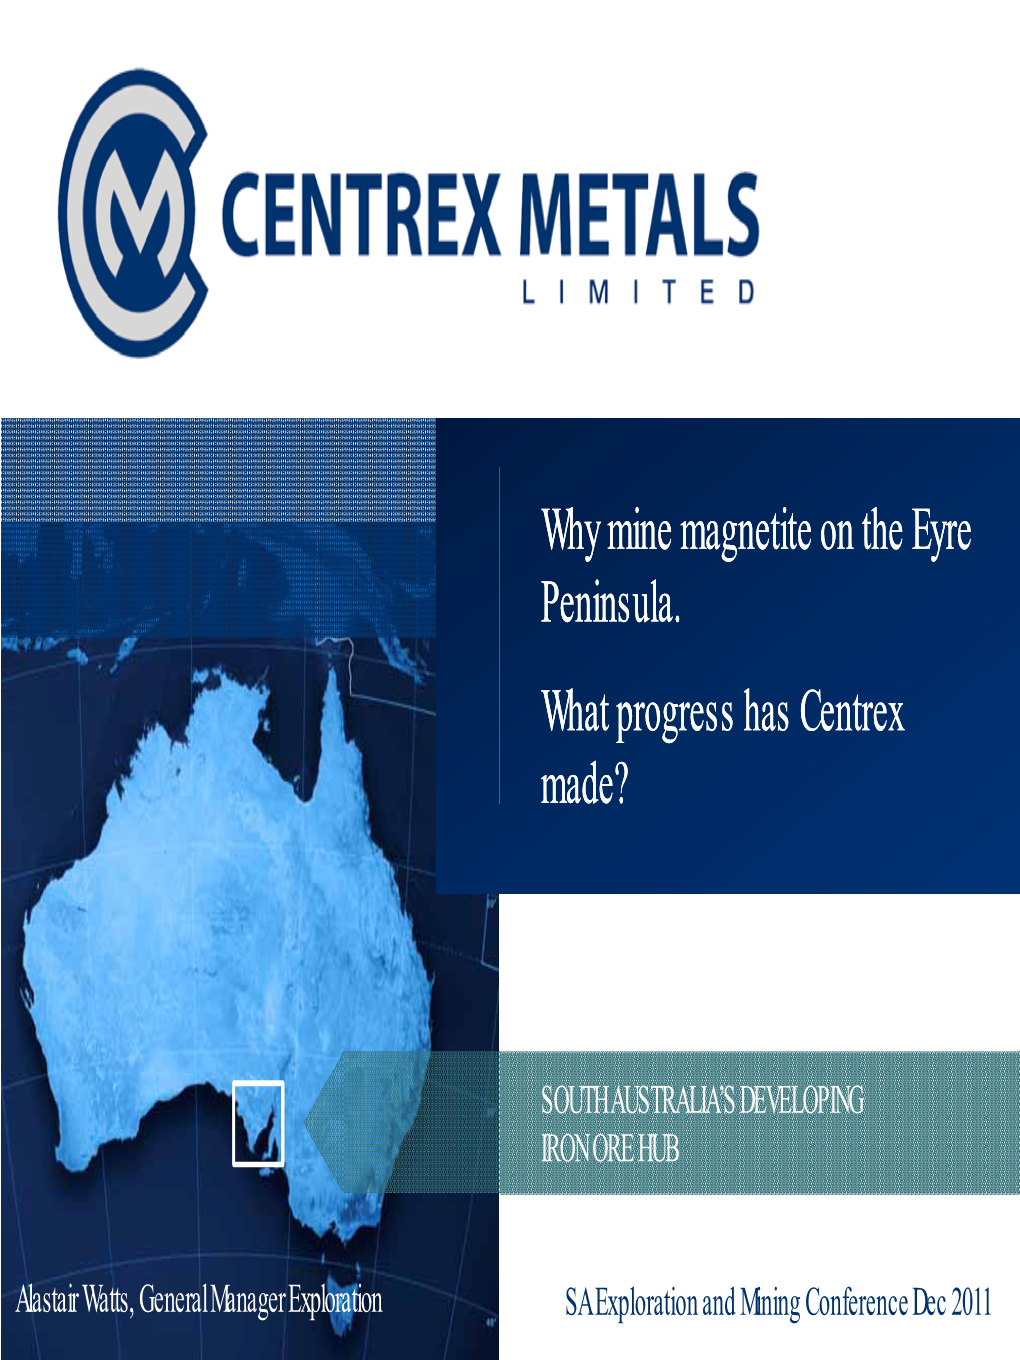 Why Mine Magnetite on the Eyre Peninsula. What Progress Has Centrex Made?